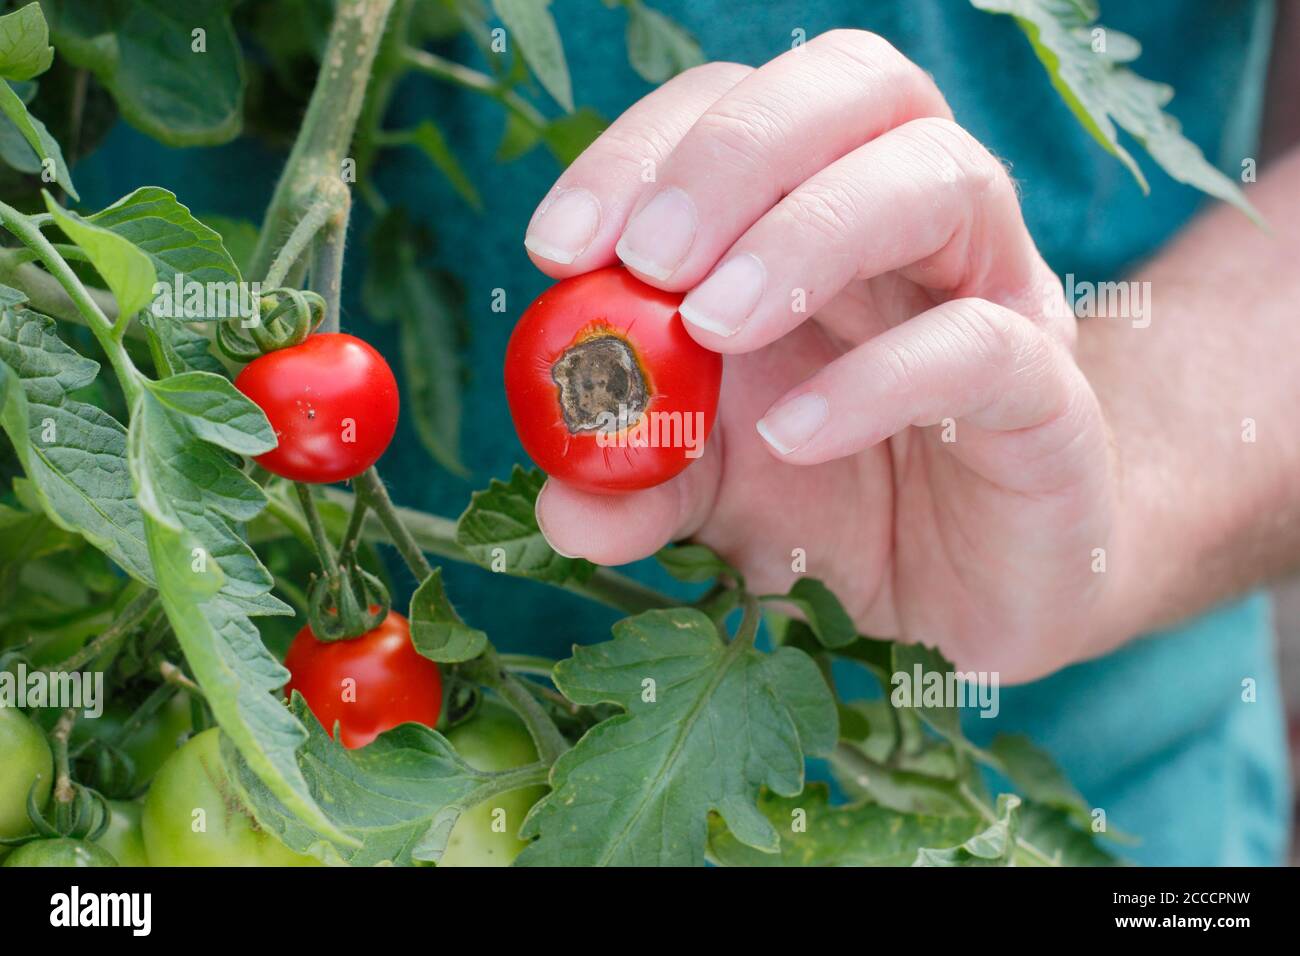 Solanum lycopersicum 'Alicante'.  Home grown tomatoes afflicted by blossom end rot caused by lack of calcium and associated watering issues. Stock Photo